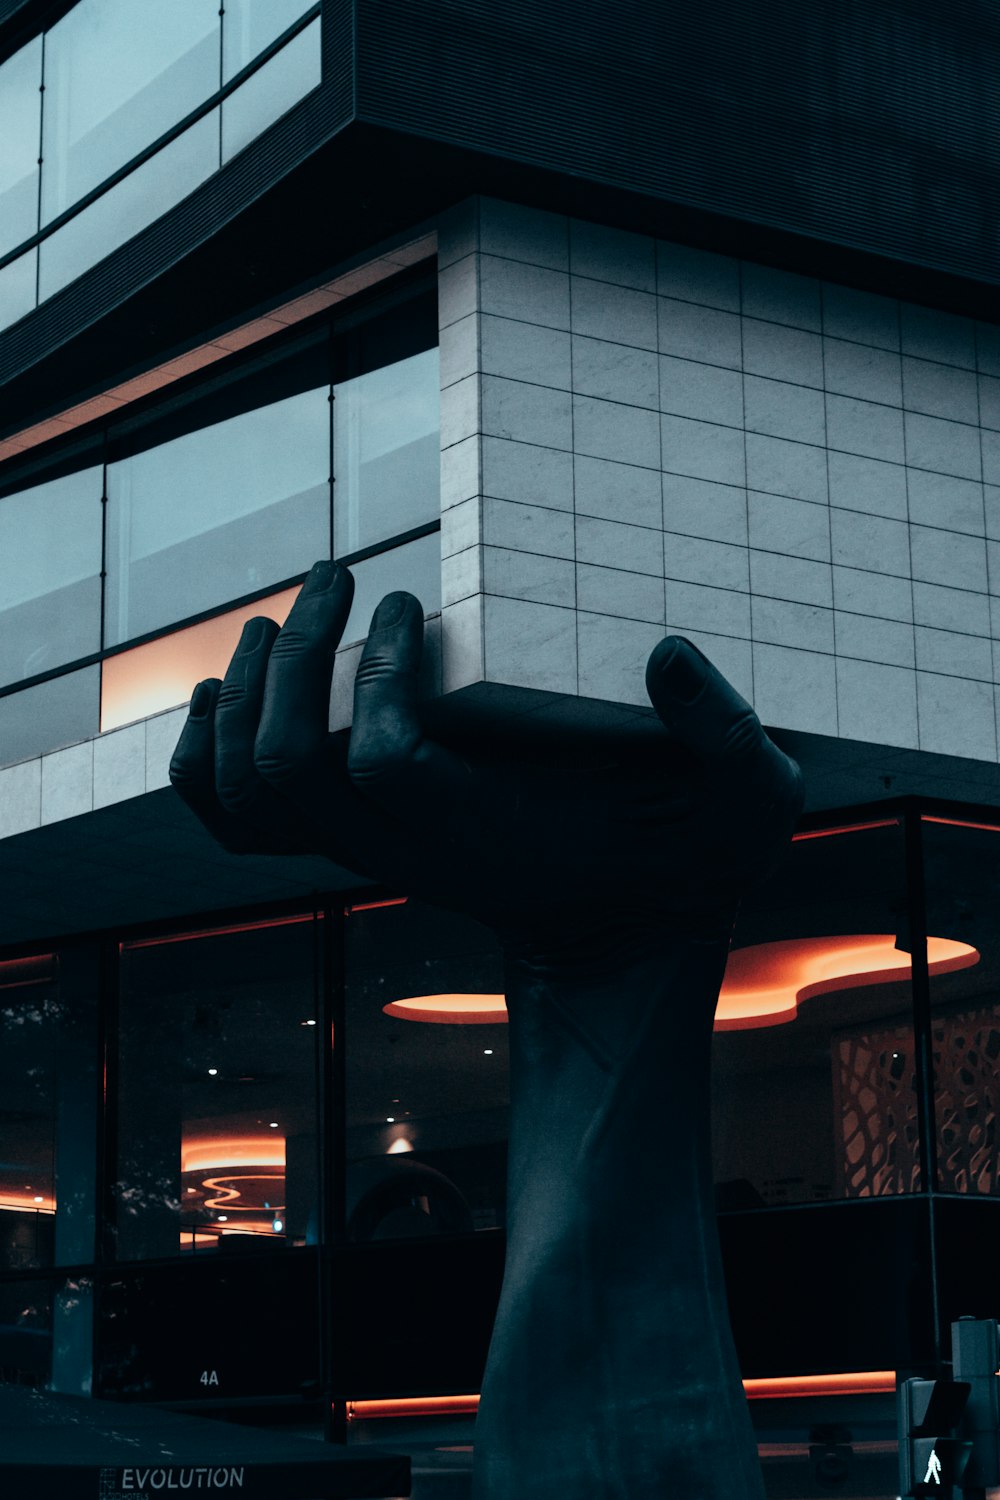 a statue of a hand holding a large object in front of a building